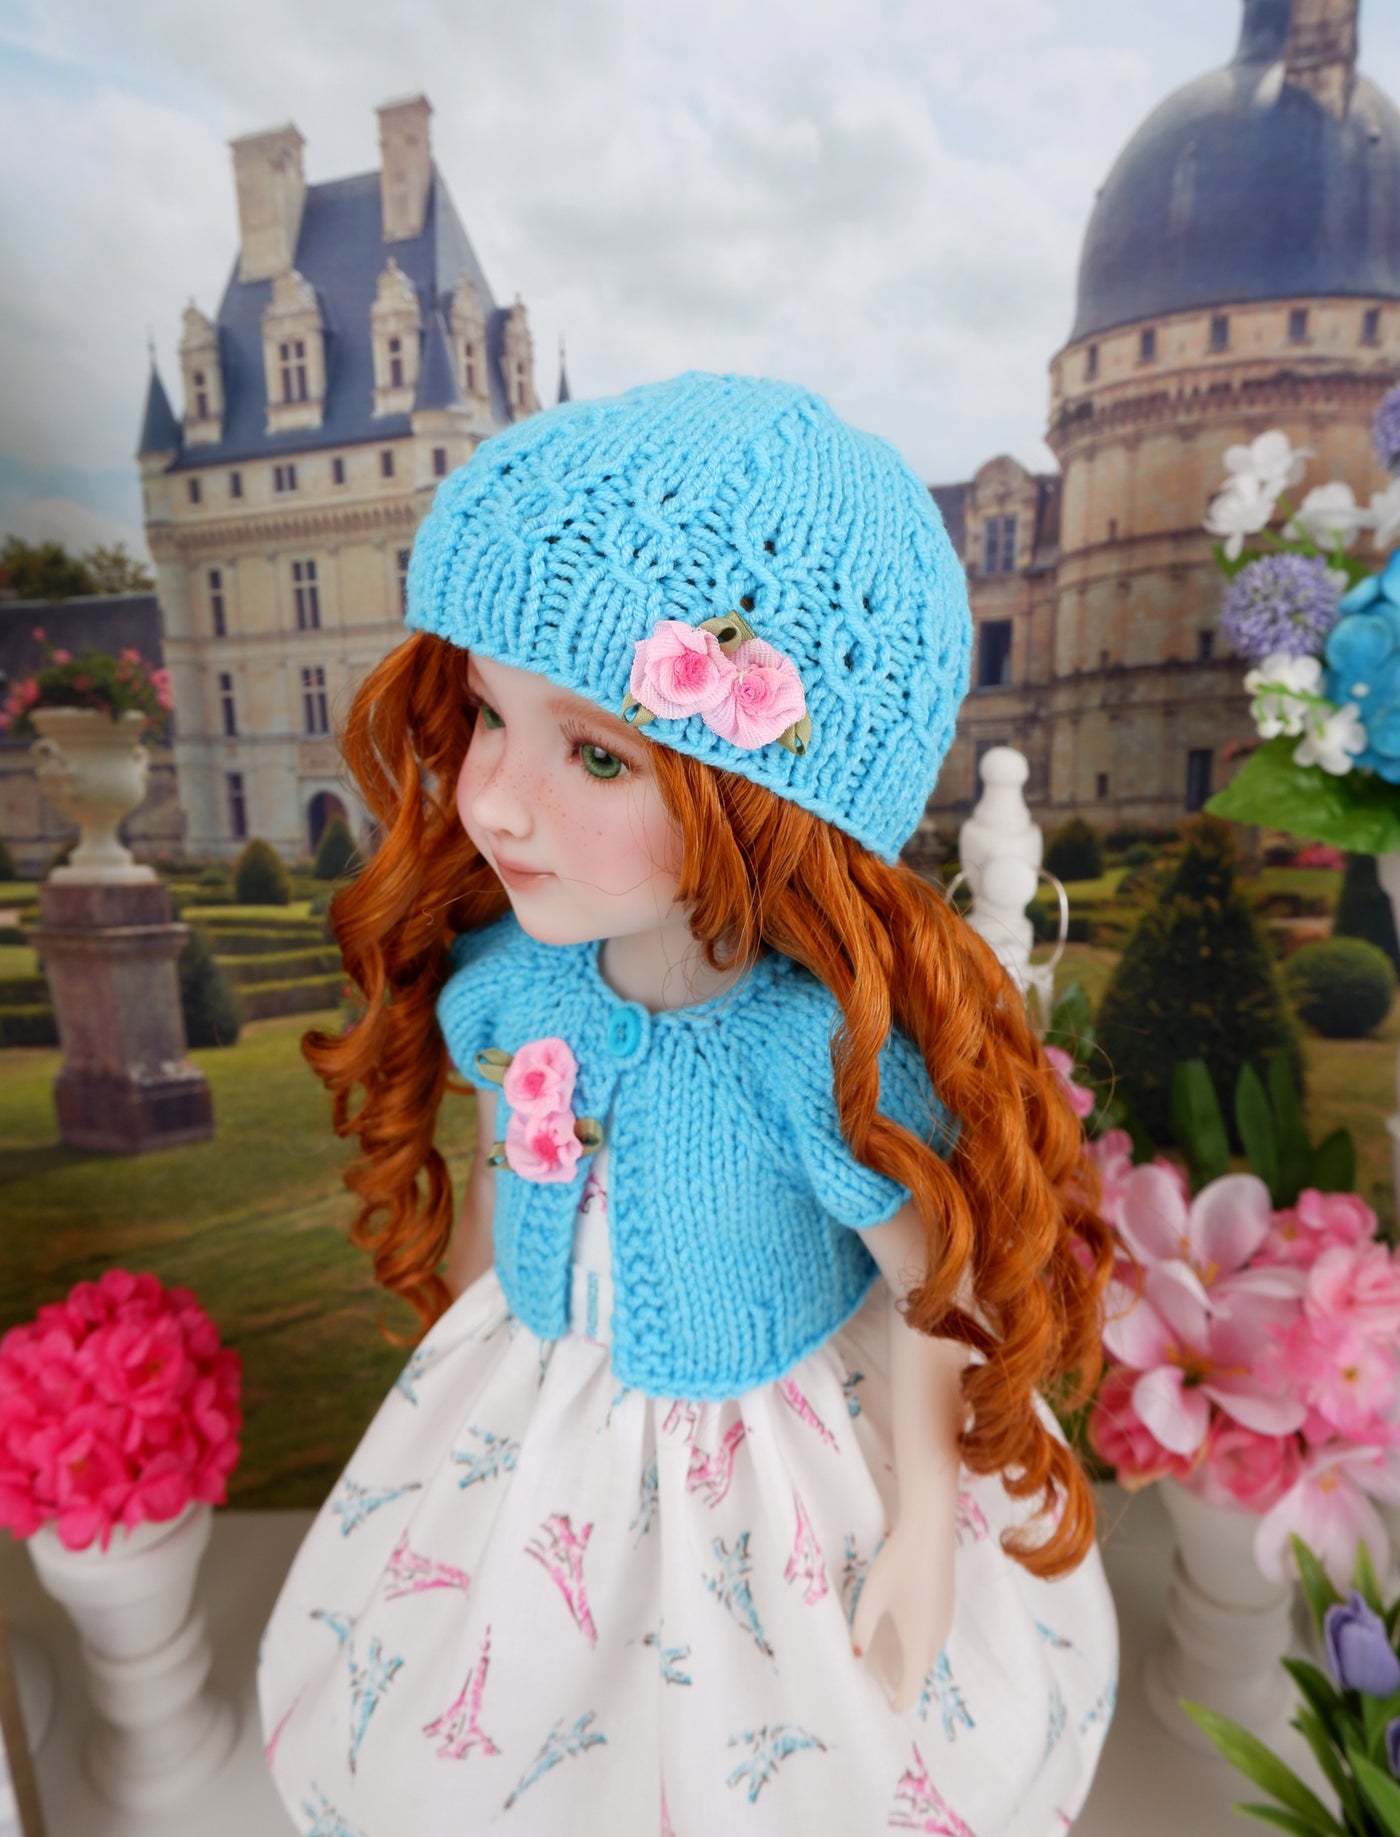 C'est La Vie - dress and sweater set with shoes for Ruby Red Fashion Friends doll